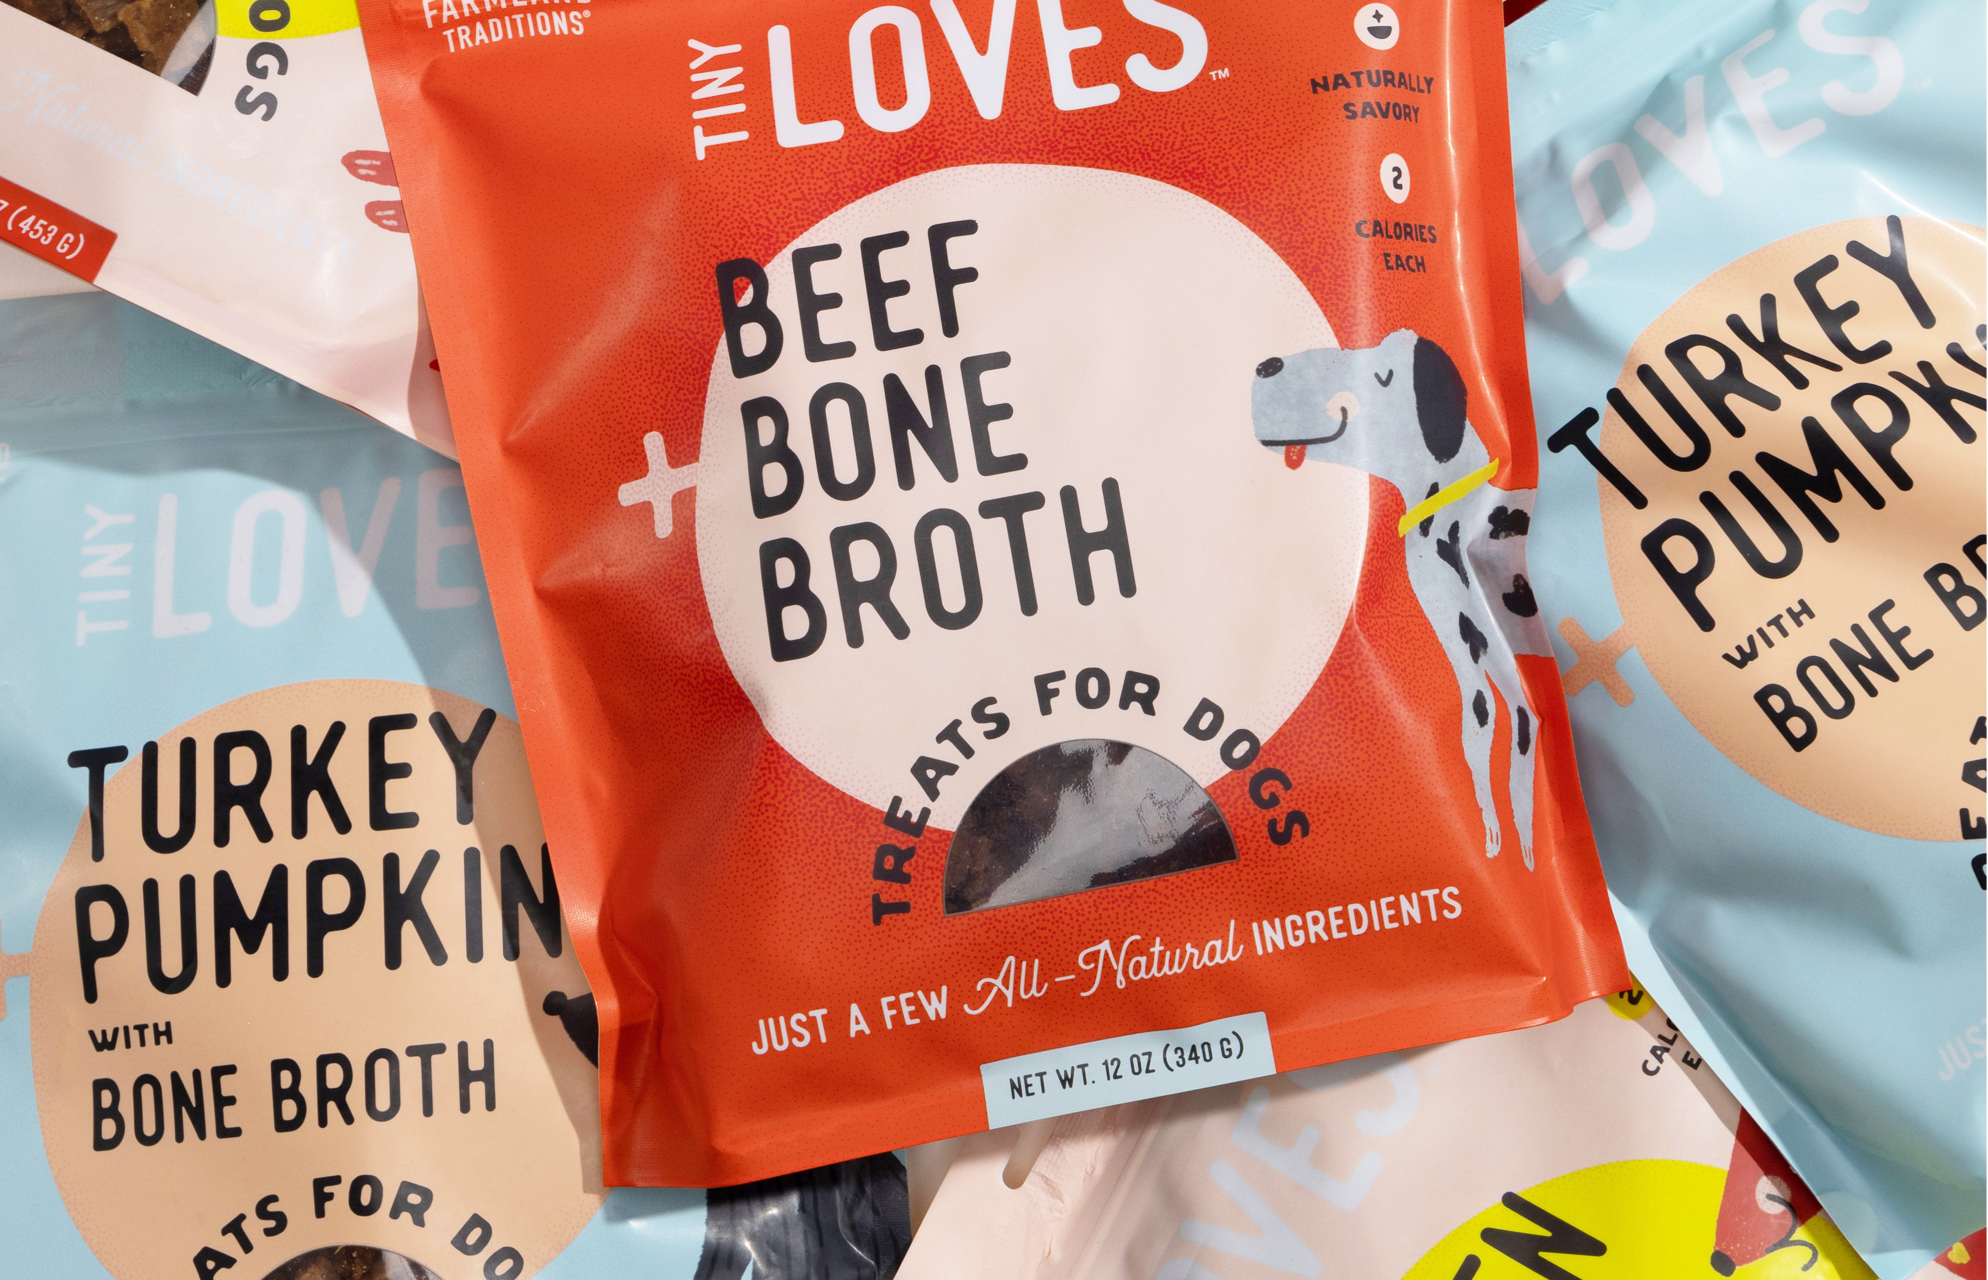 Farmland_Traditions_Chicken_and_Beef_Bone_Broth_Dog_Treats_Tiny_Loves_Pet_Industry_Branding_Strategy_Packaging